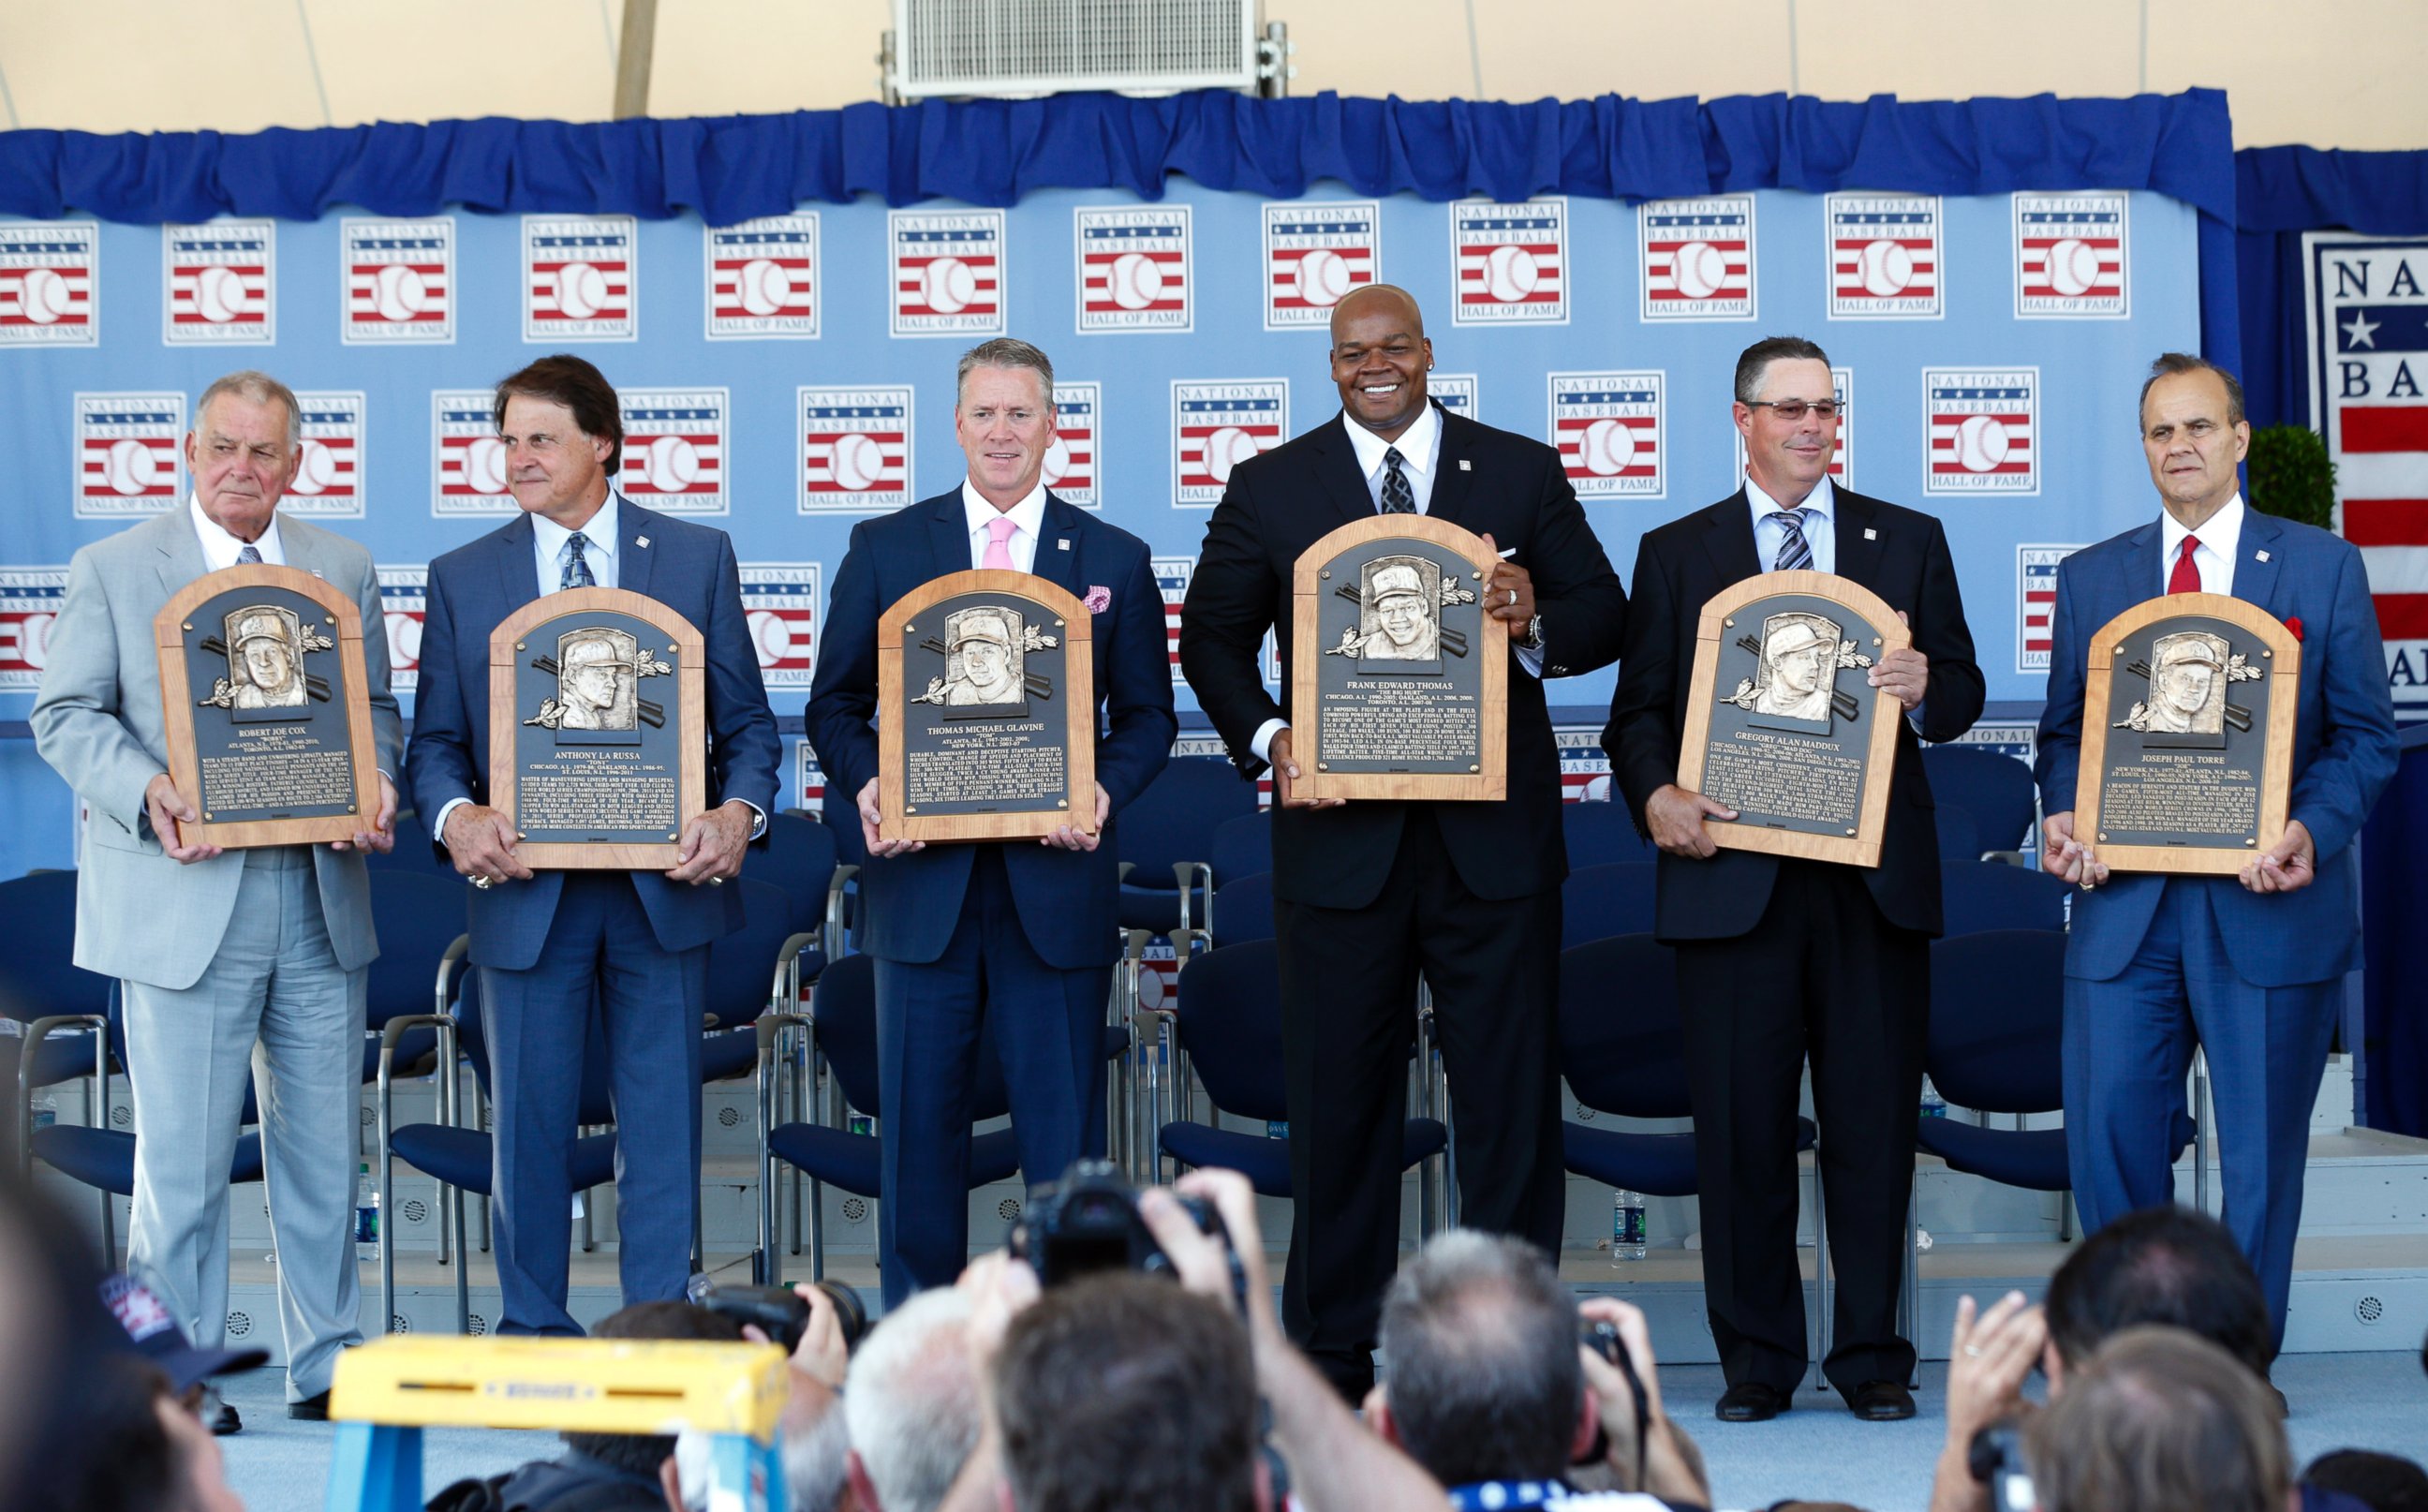 PHOTO: National Baseball Hall of Fame inductees, from left,  Bobby Cox, Tony La Russa, Tom Glavine, Frank Thomas, Greg Maddux and Joe Torre hold their plaques after their induction ceremony, July 27, 2014, in Cooperstown, N.Y.